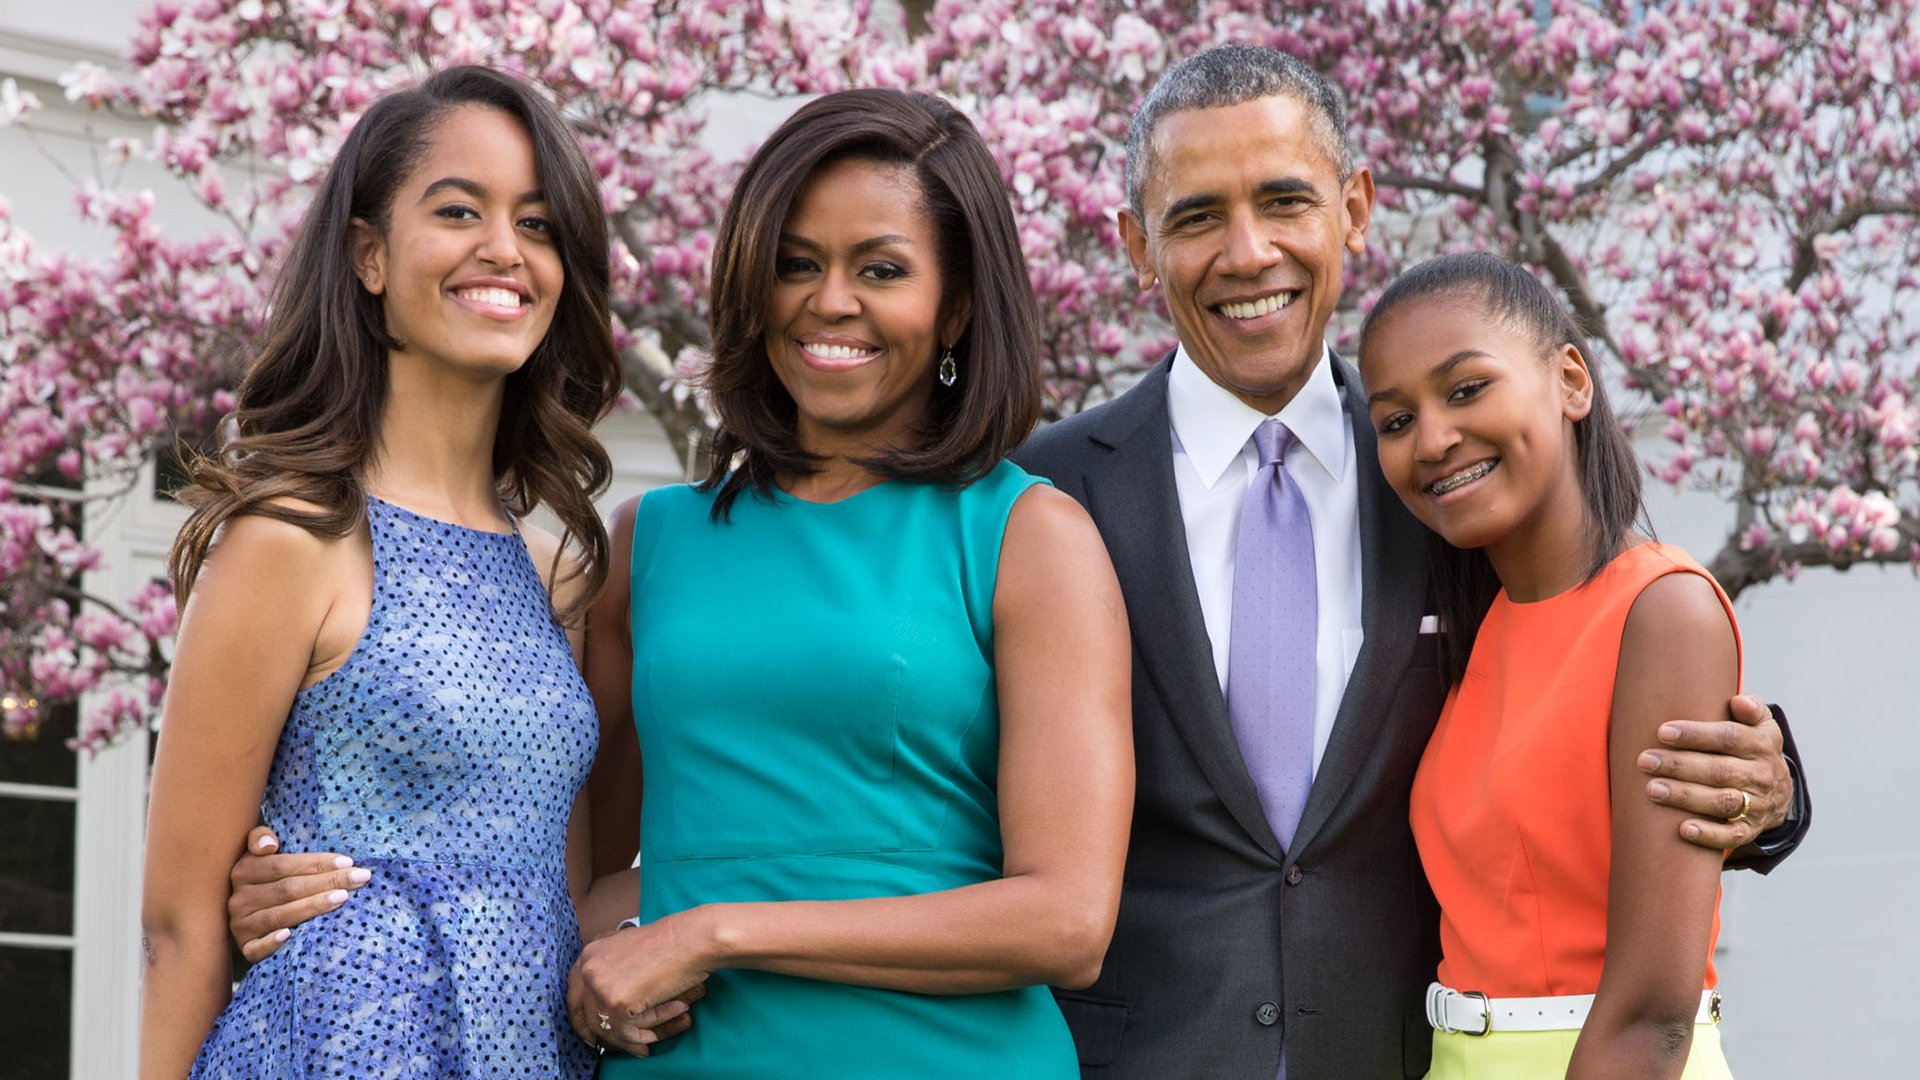 president barack obama first lady michelle obama and daughters malia and sasha pose for a family portrait with bo and sunny in the rose garden of the white house on easter sunday april 5 2015 official white house photo by pete souza